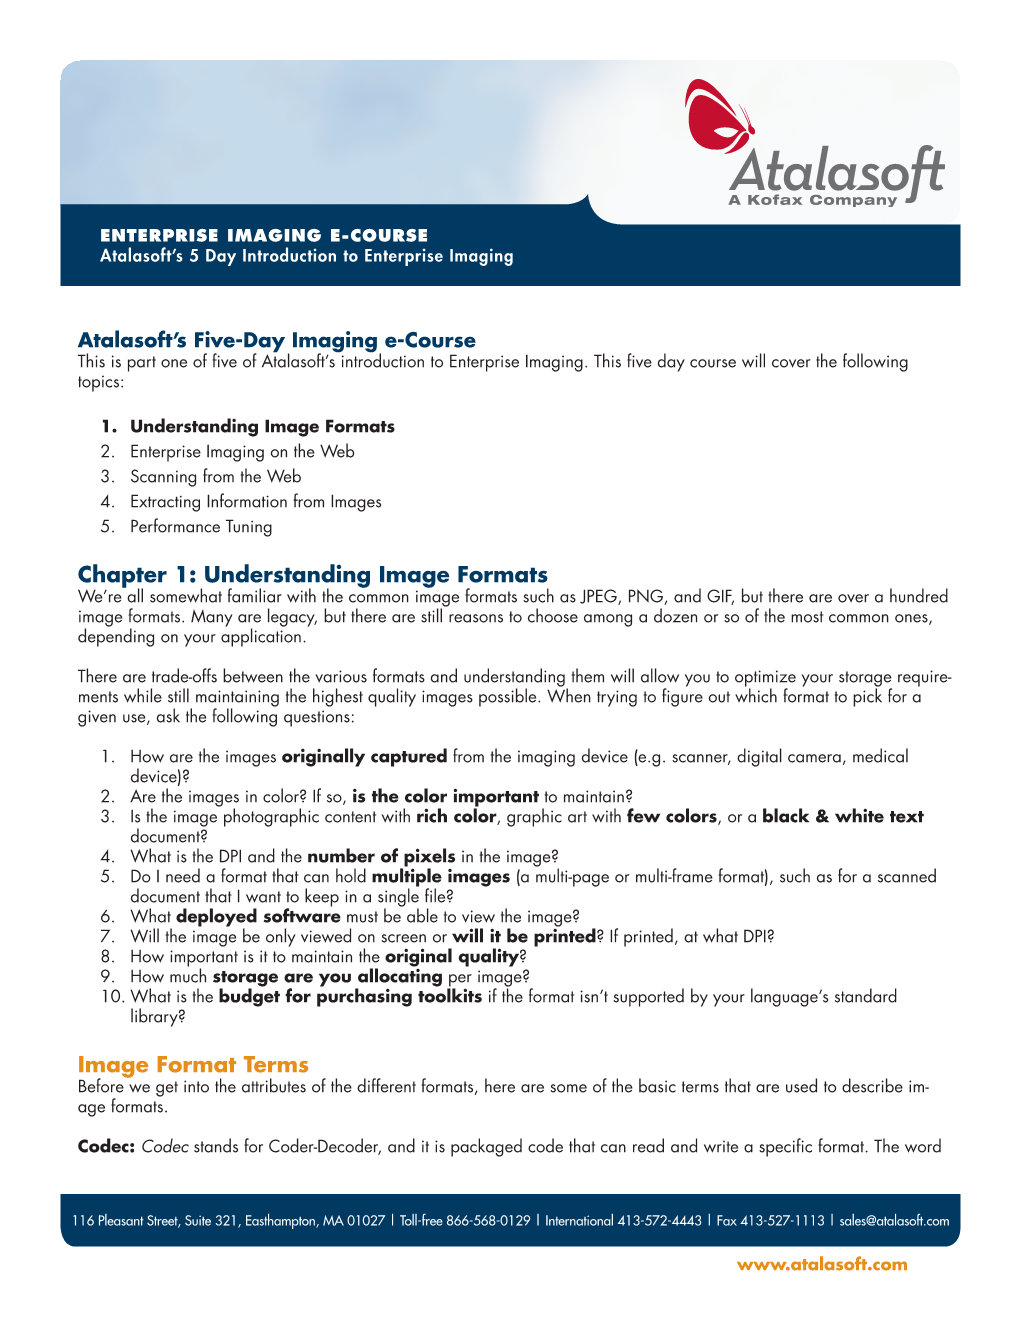 Enterprise Imaging E-Course Atalasoft's 5 Day Introduction To